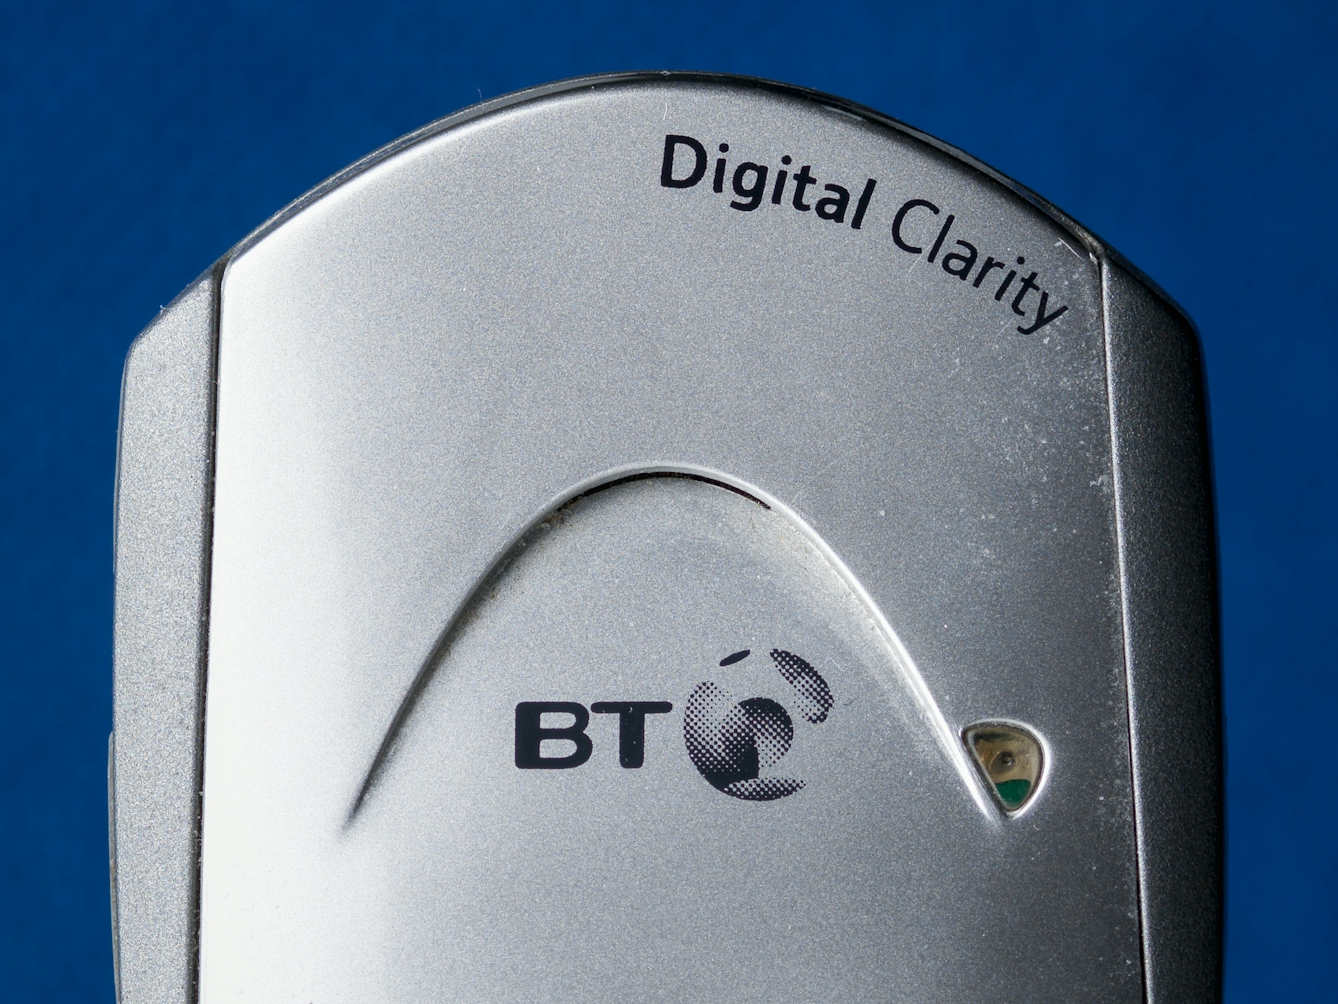 Photograph of a close up of a telephone receiver's earpiece, against a blue felt background. On the receiver's display is the text 'base 1' and printed on the top of the phone are the words, 'Digital Clarity'.